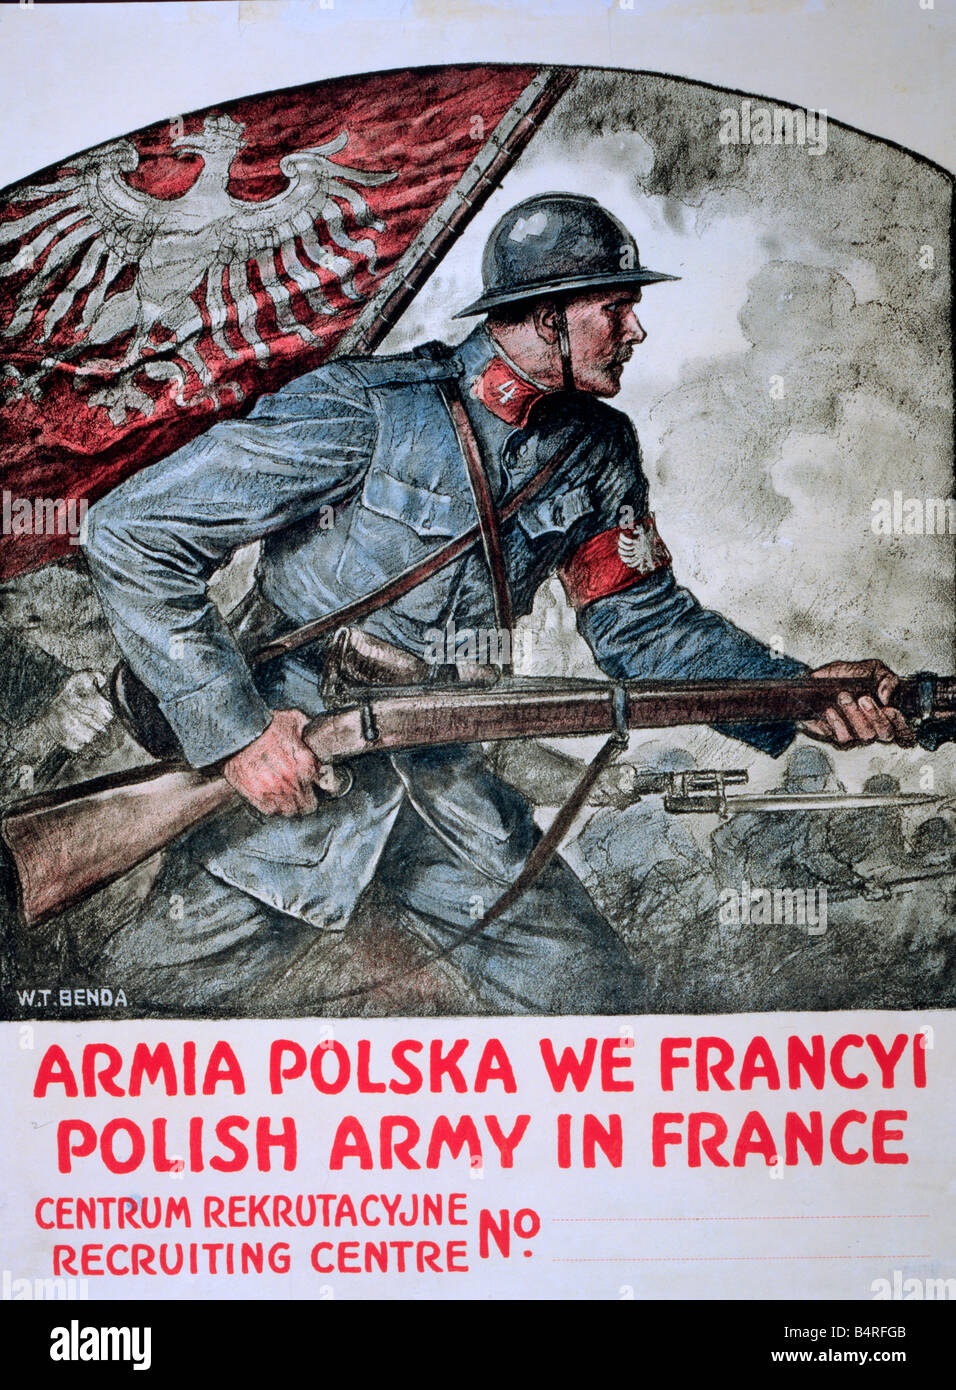 Polish Army in France - Recruiting Poster from World War I Stock Photo